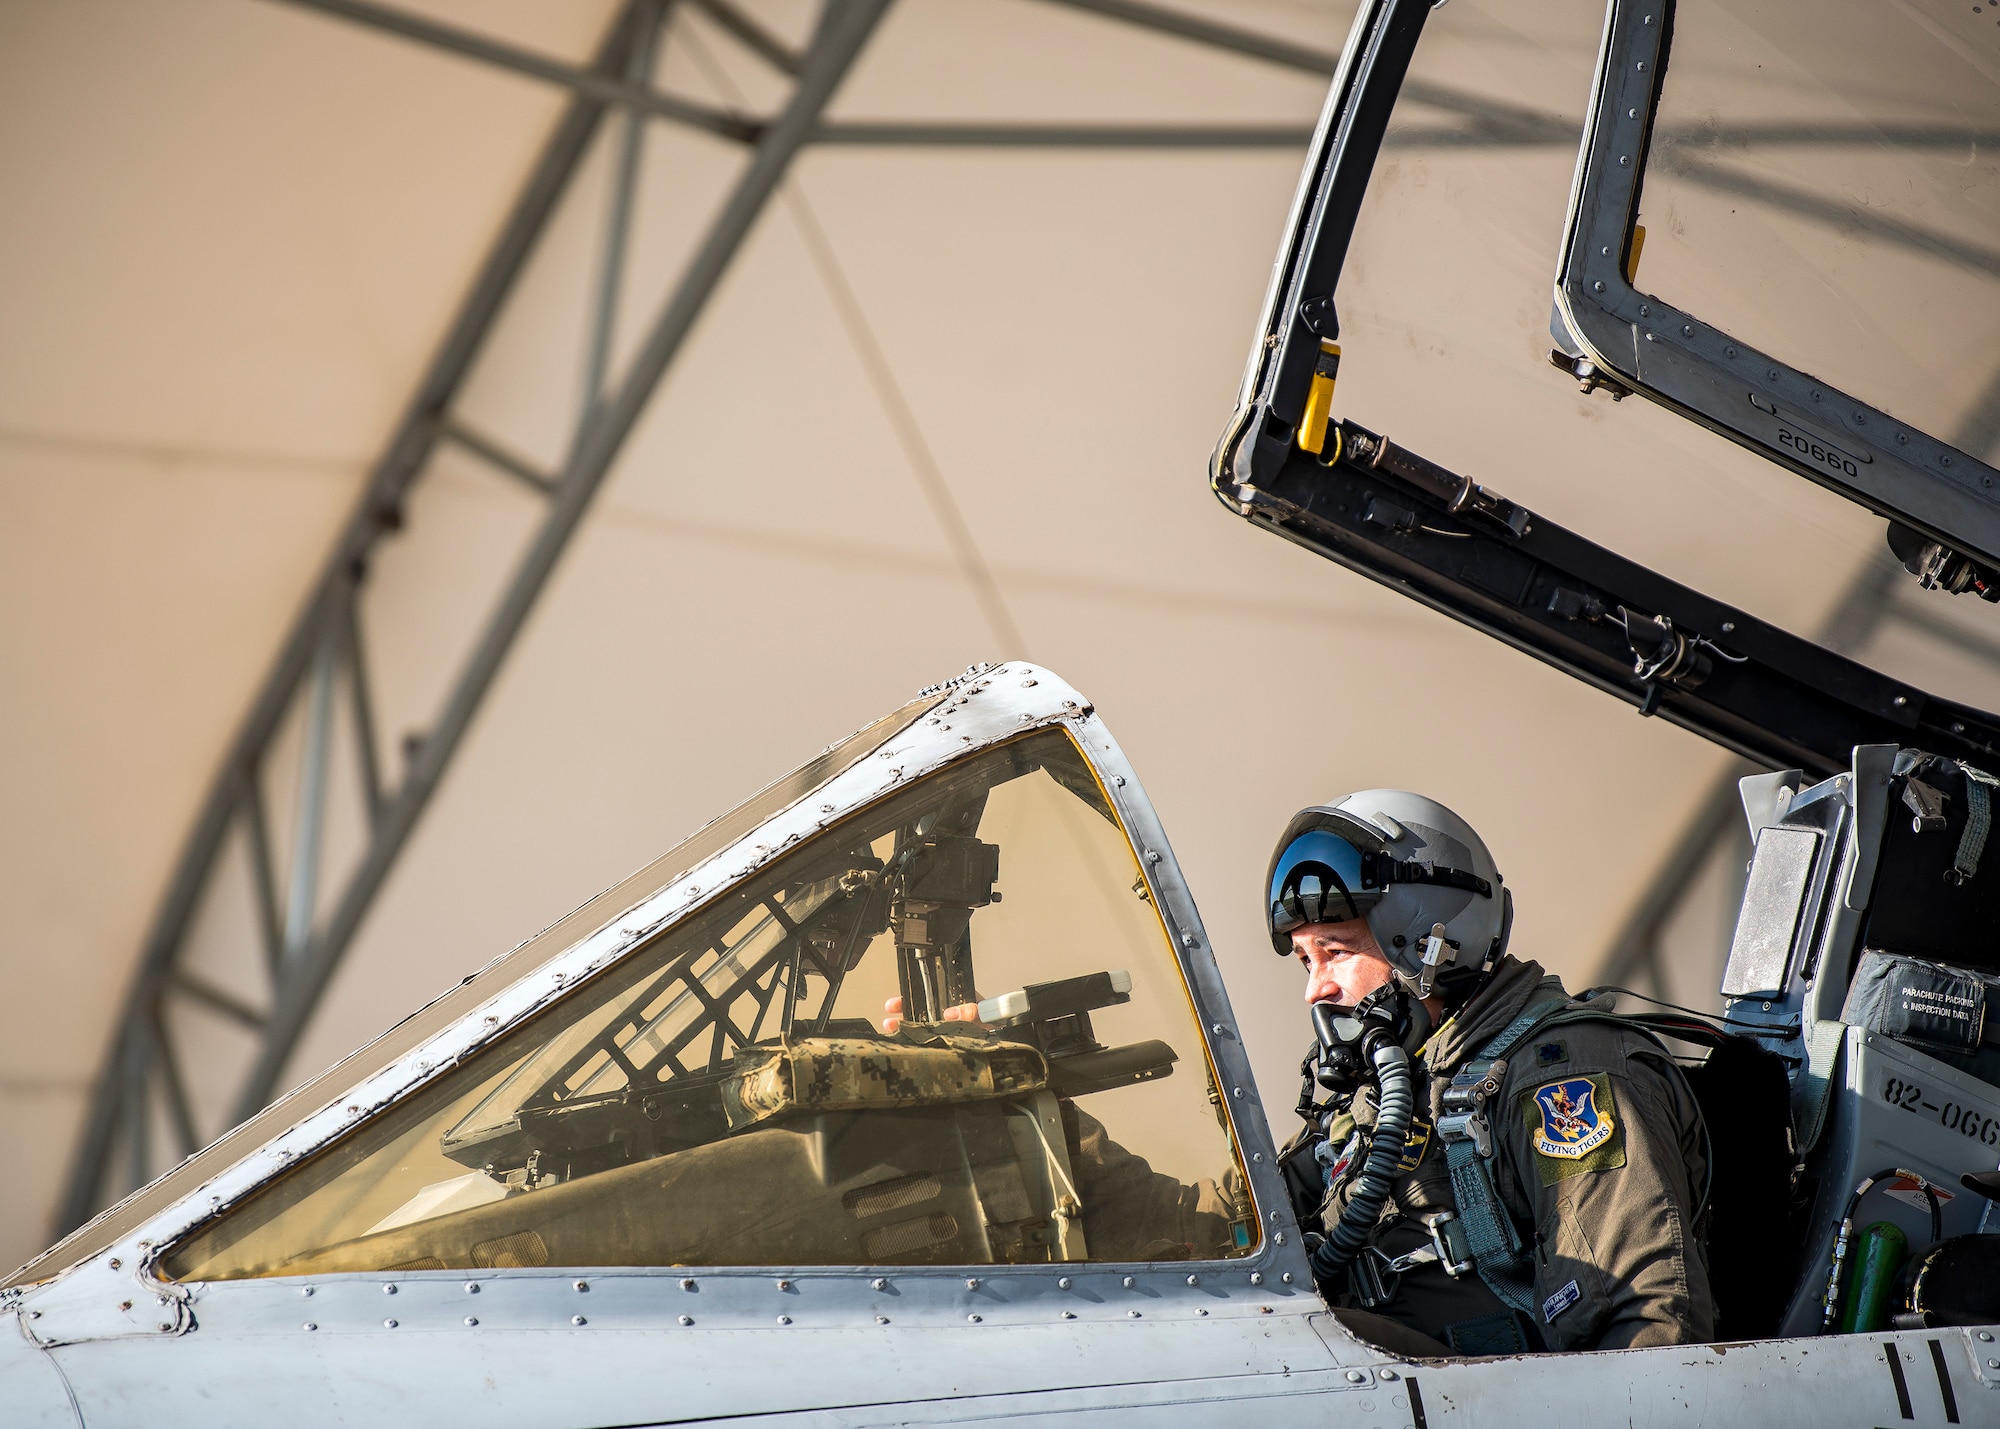 A pilot from the 74th Fighter Squadron sits inside of the cockpit of an A-10C Thunderbolt II prior to departing for Little Rock Air Force Base, Ark., Aug. 30, 2019, at Moody Air Force Base, Ga. Moody’s A-10s were relocated to Little Rock in anticipation of Hurricane Dorian. (U.S. Air Force photo by Airman 1st Class Eugene Oliver)